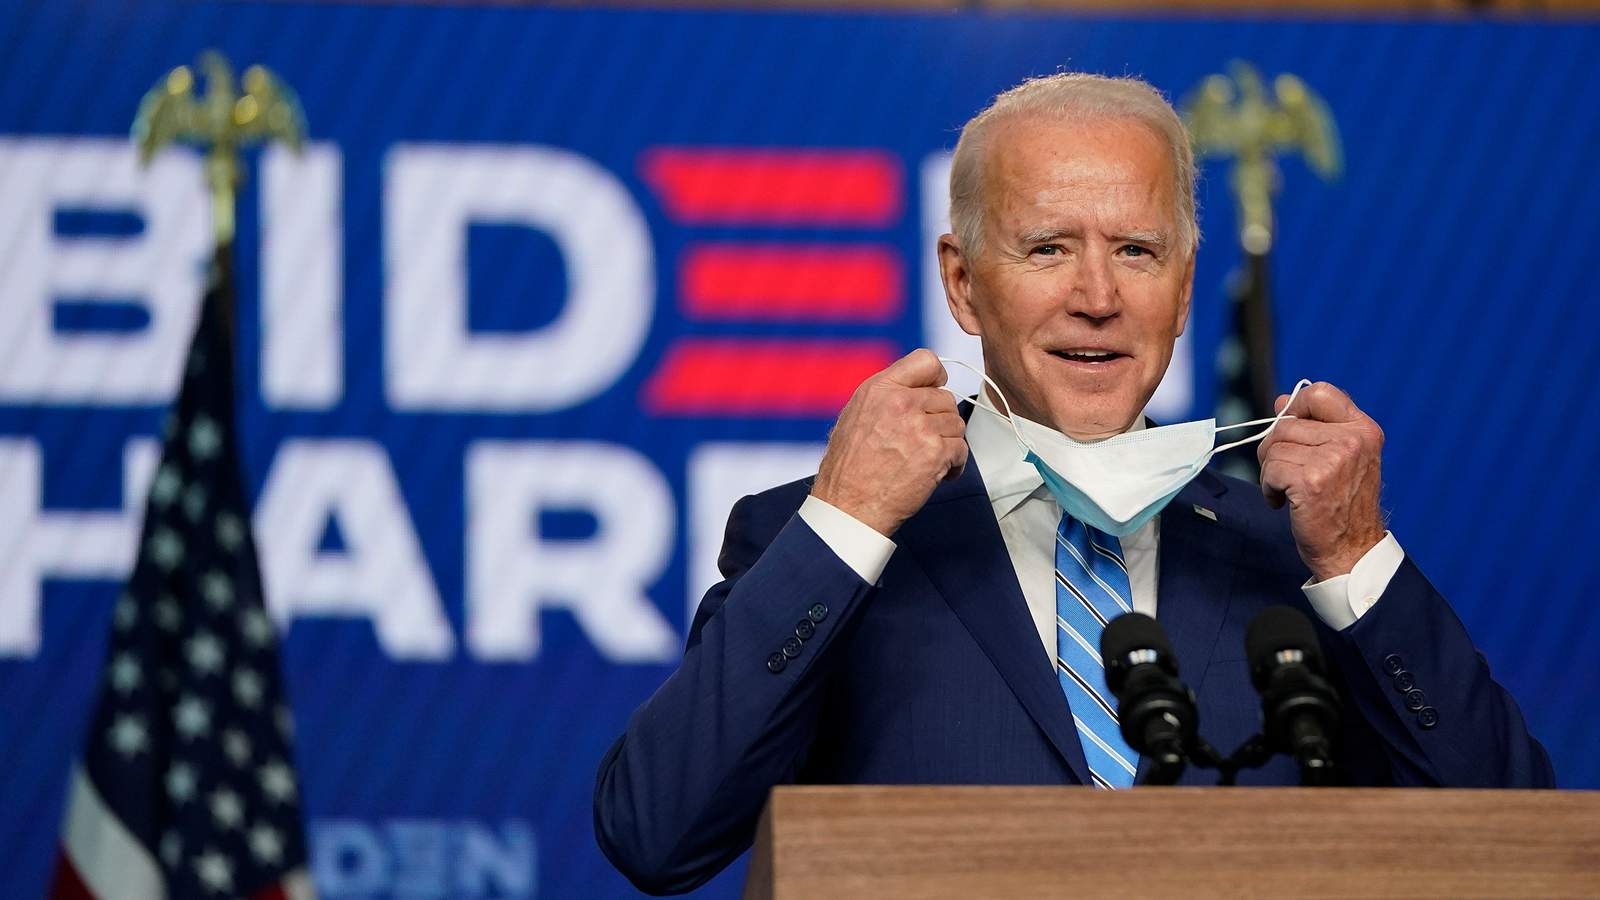 Joe Biden projected to win presidential election with 279 electoral votes